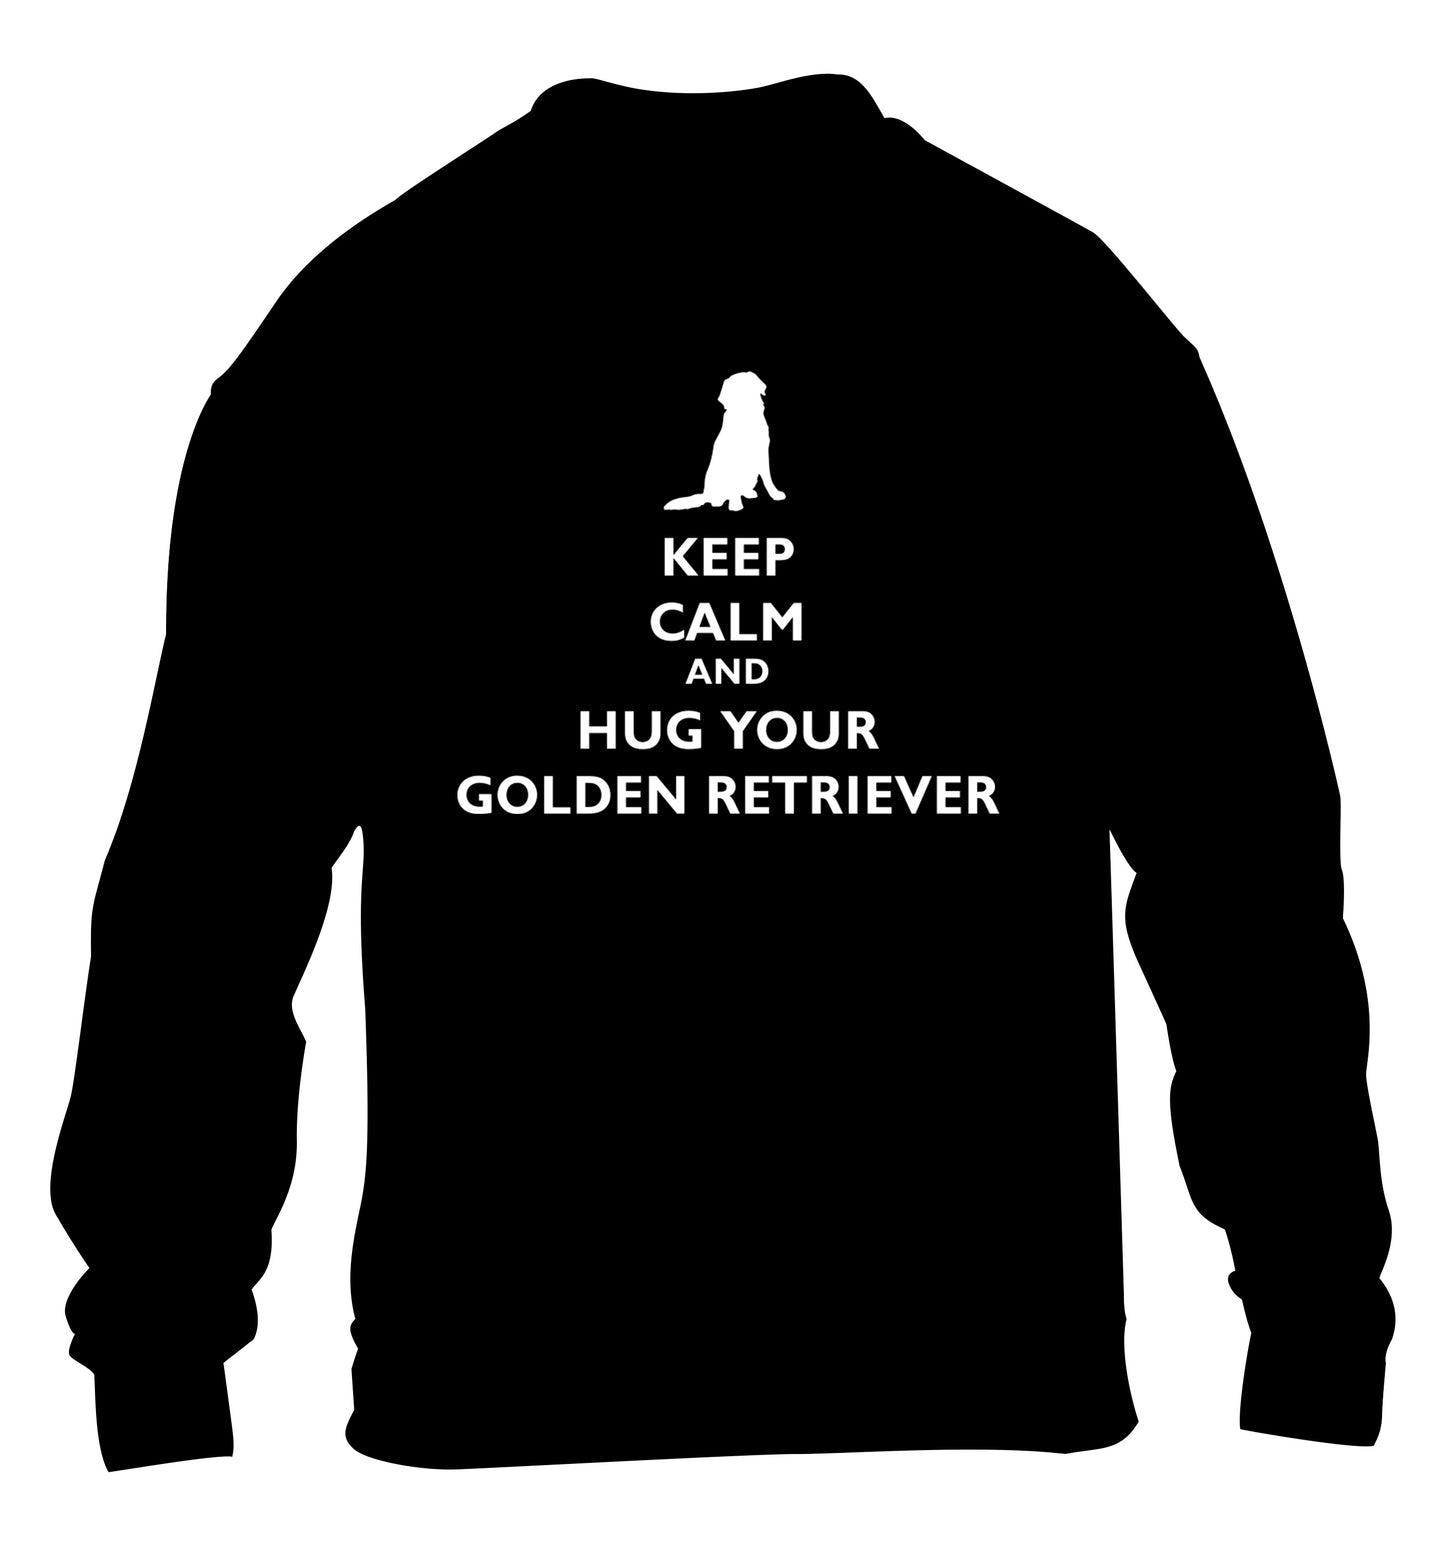 Keep calm and hug your golden retriever children's black sweater 12-13 Years